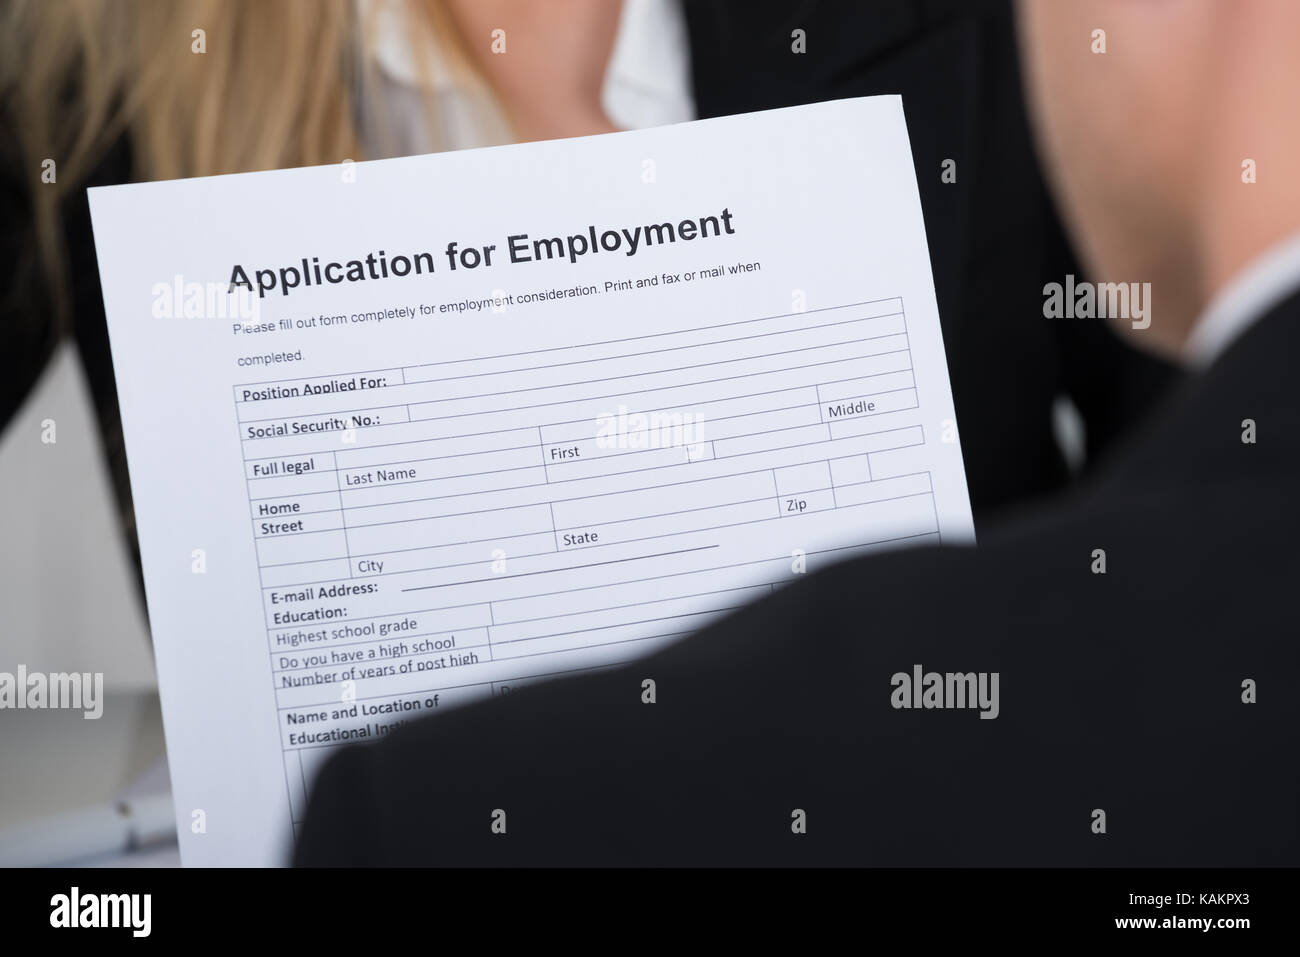 Male candidate holding application form in front of interviewer in office Stock Photo